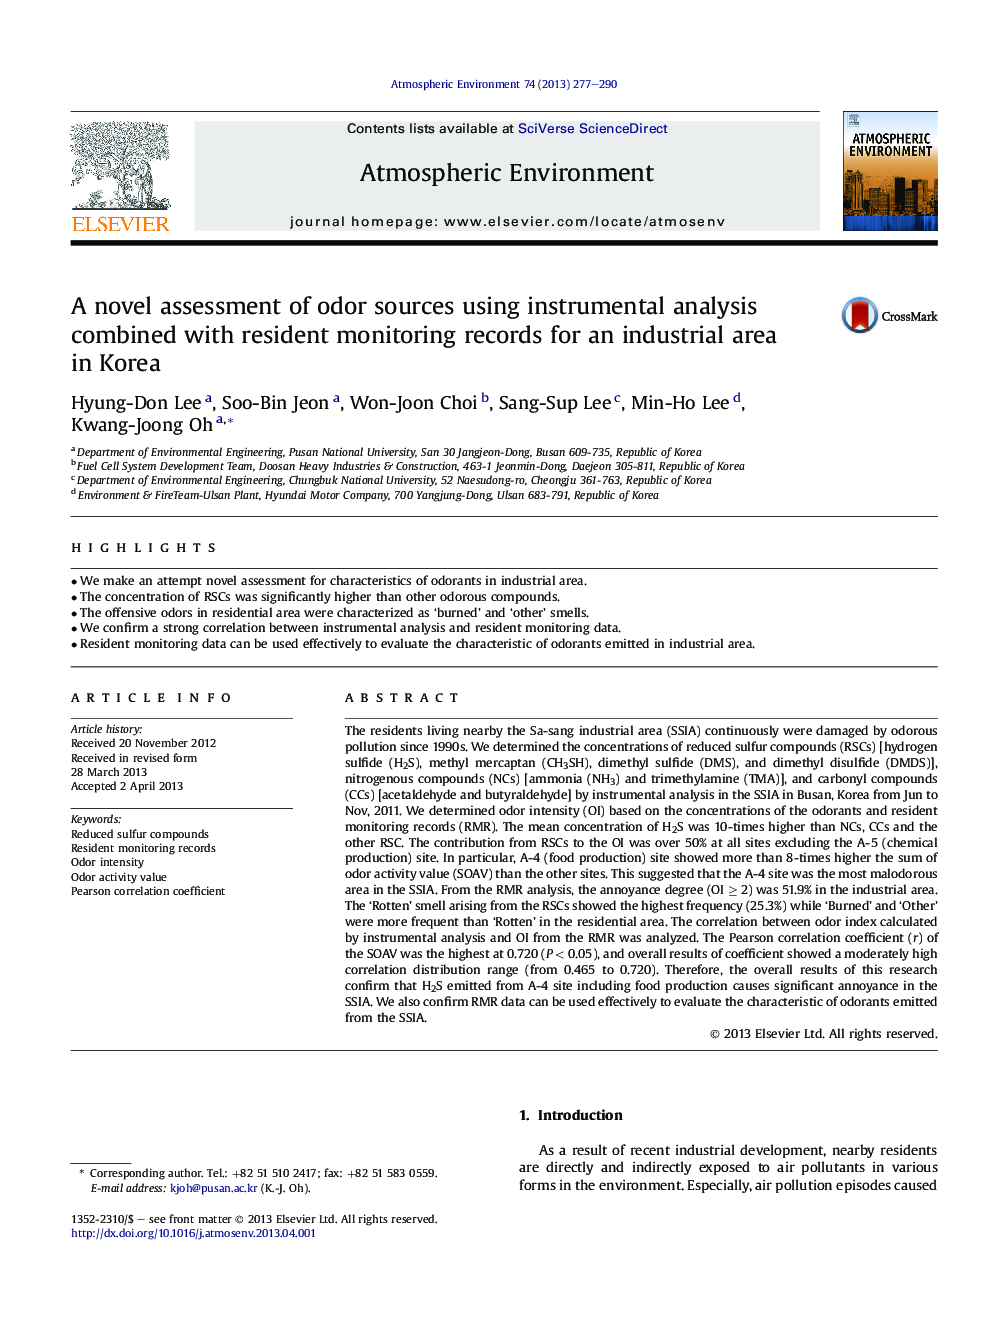 A novel assessment of odor sources using instrumental analysis combined with resident monitoring records for an industrial area in Korea